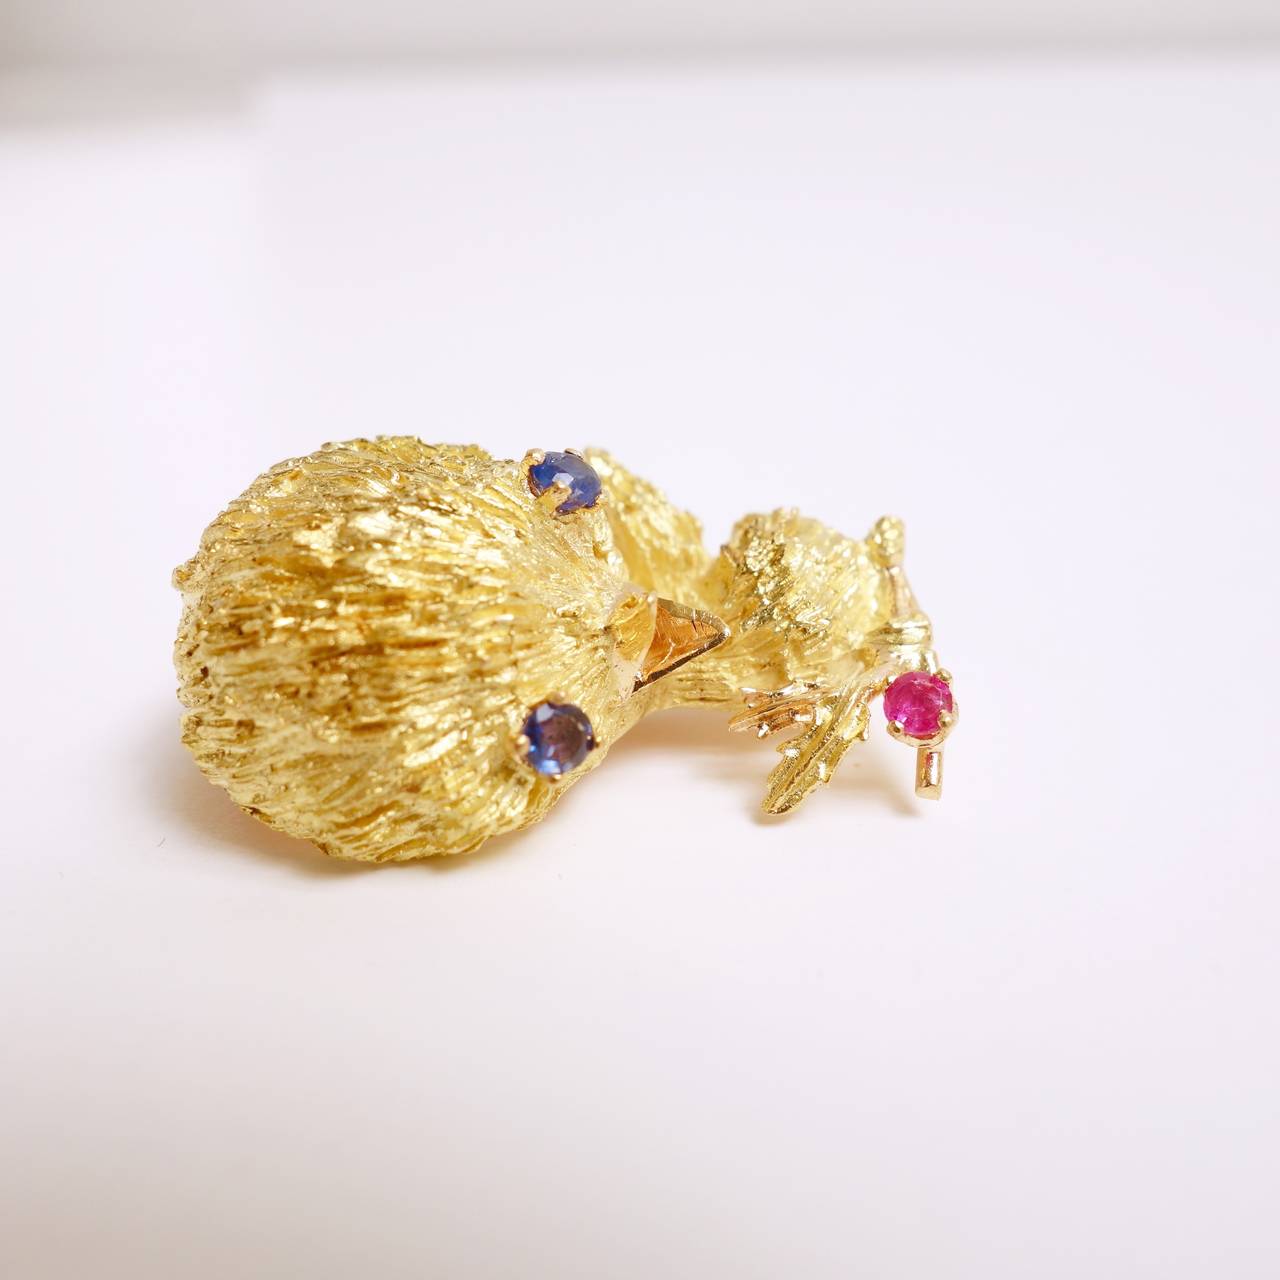 Sweet 18K yellow gold textured finish bird brooch with blue sapphire eyes and a round ruby accent. 
Measurments: 32 mm H x 22 mm W x 16mm x 12 mm D 
Weight: 13.6 grams